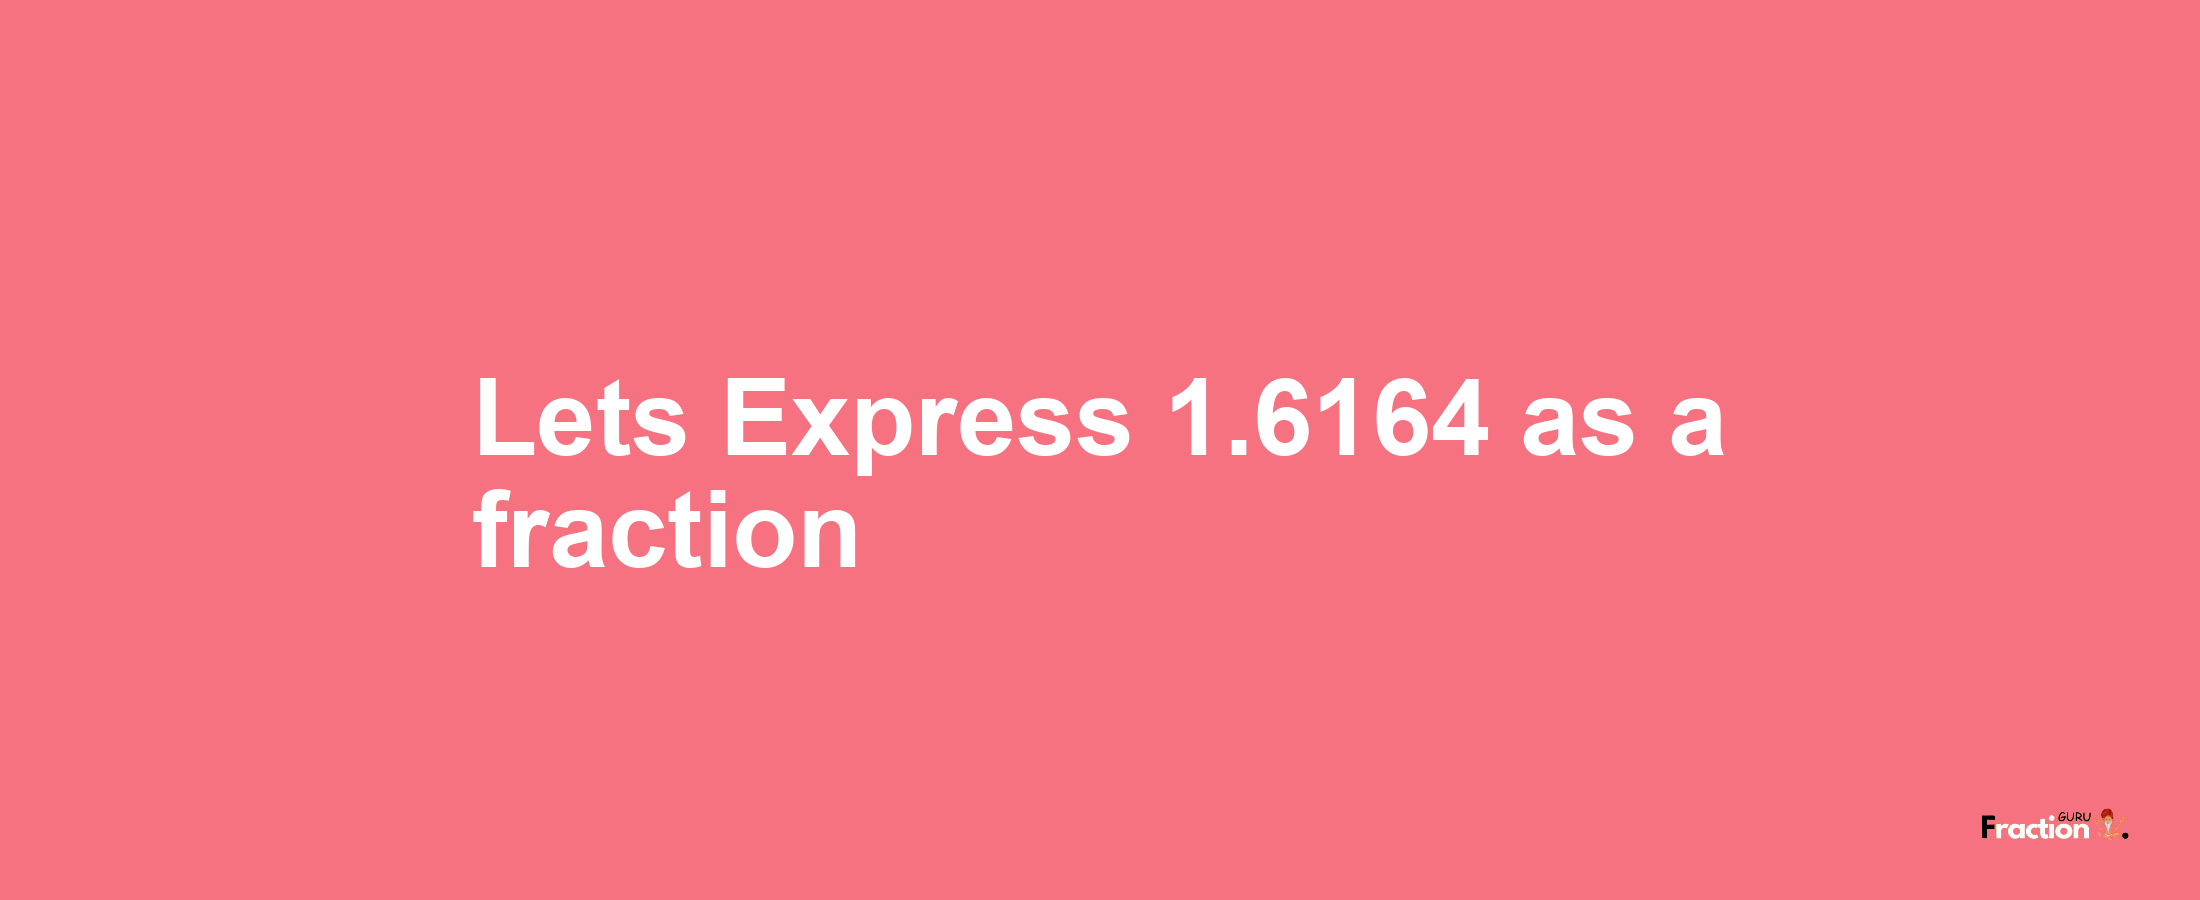 Lets Express 1.6164 as afraction